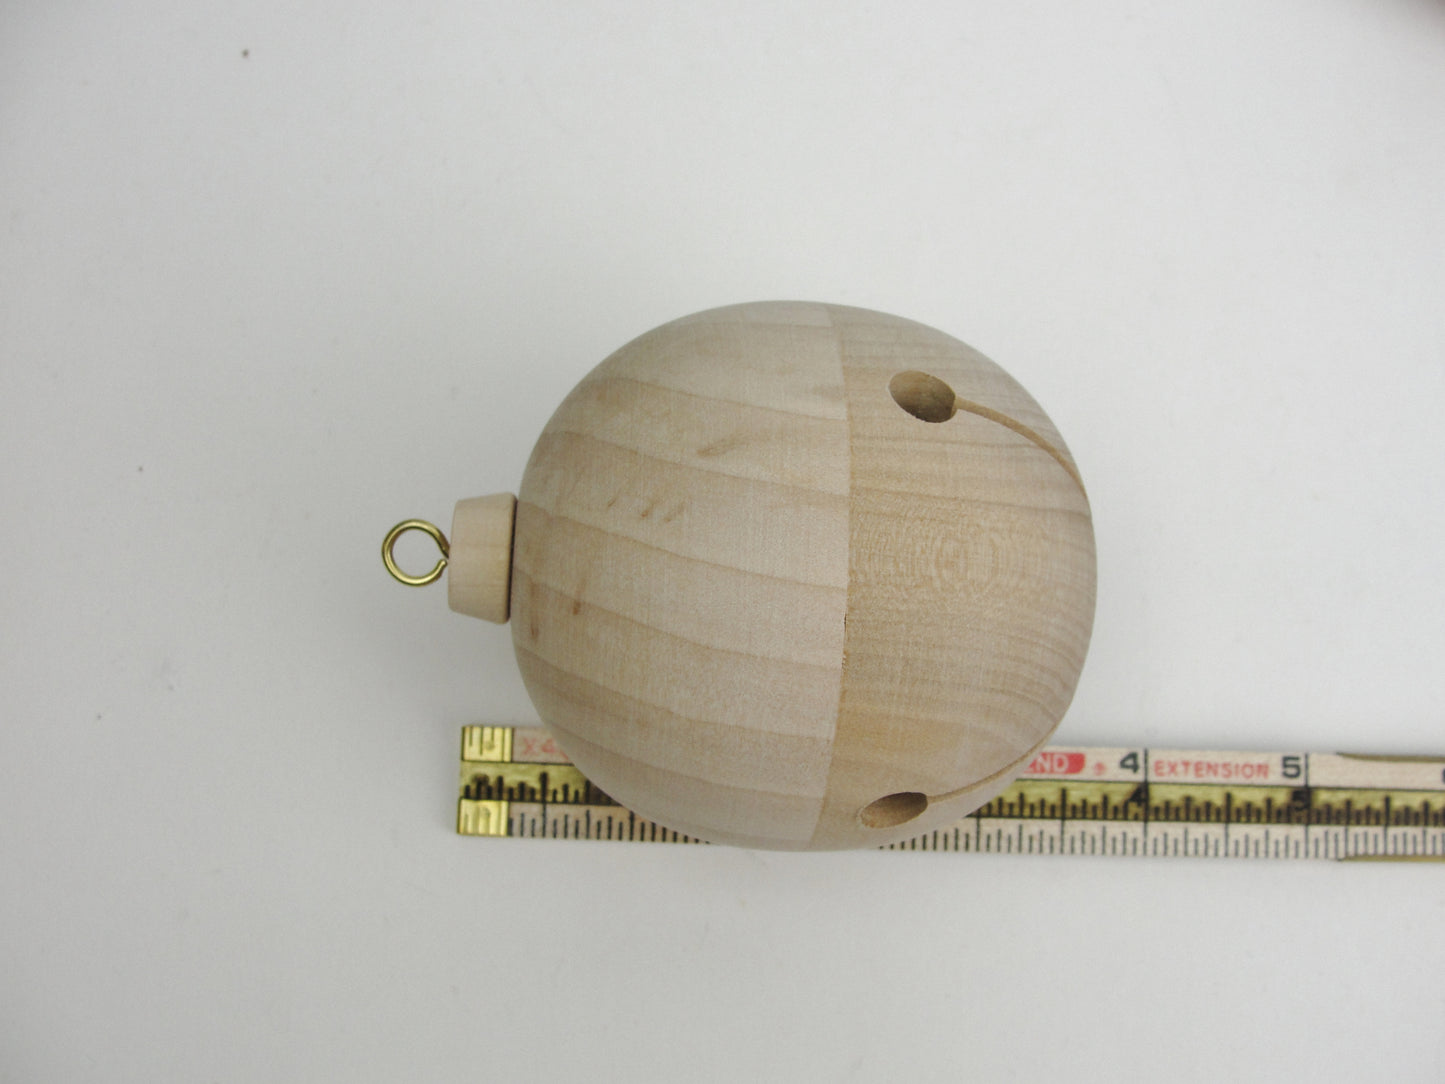 Wood jingle bell choose of 3 available sizes - Wood parts - Craft Supply House